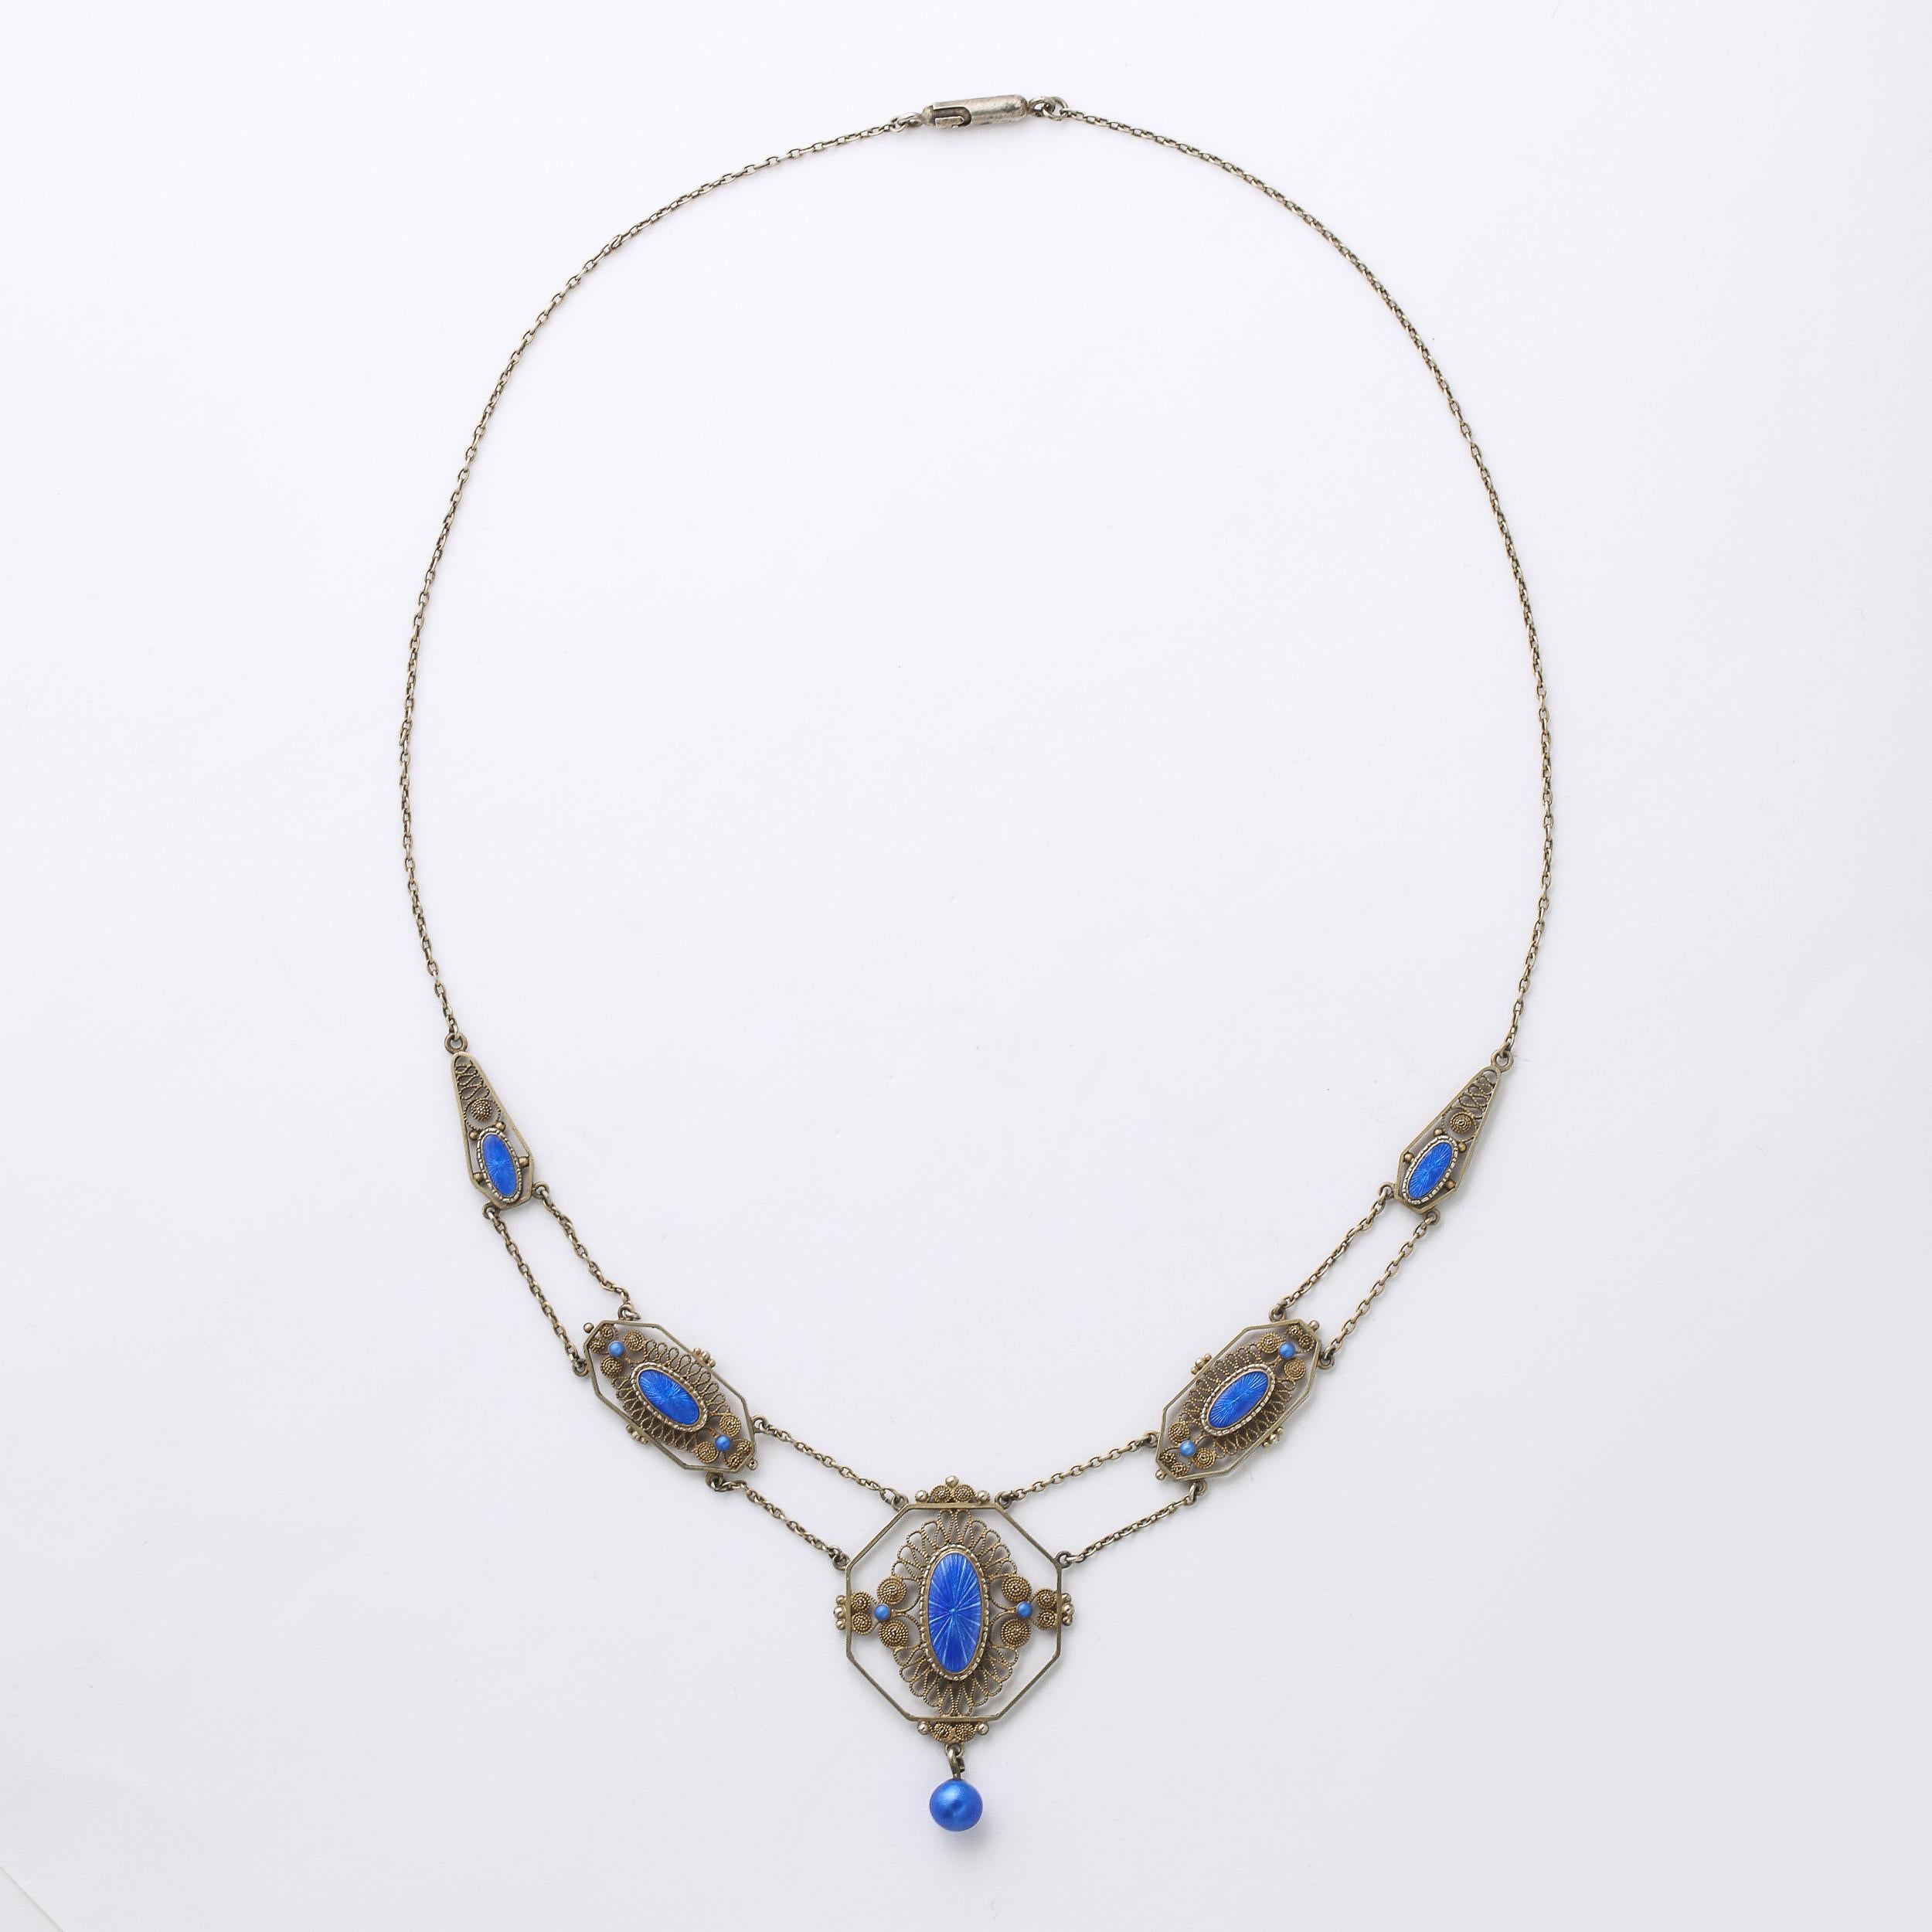 This Antique Edwardian swag design necklace features 5 cartouches set with a filigree design set with  blue guilloche enamel accents . This stunning necklace has a Renaissance revival feel . It is marked 830 s and is also fitted with the original